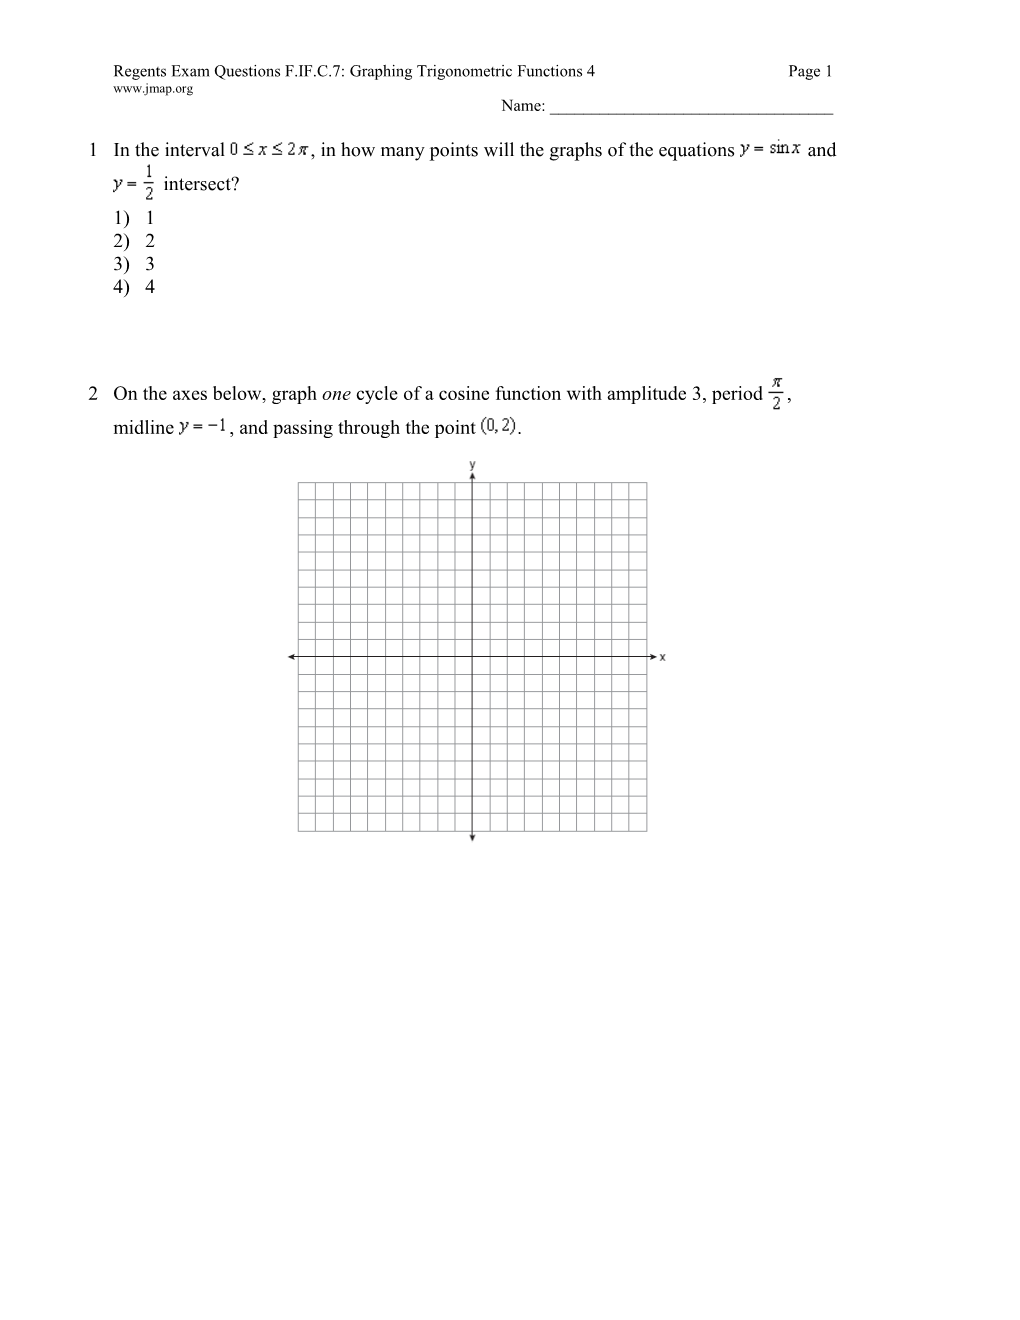 Regents Exam Questions F.IF.C.7: Graphing Trigonometric Functions 4 Page 11